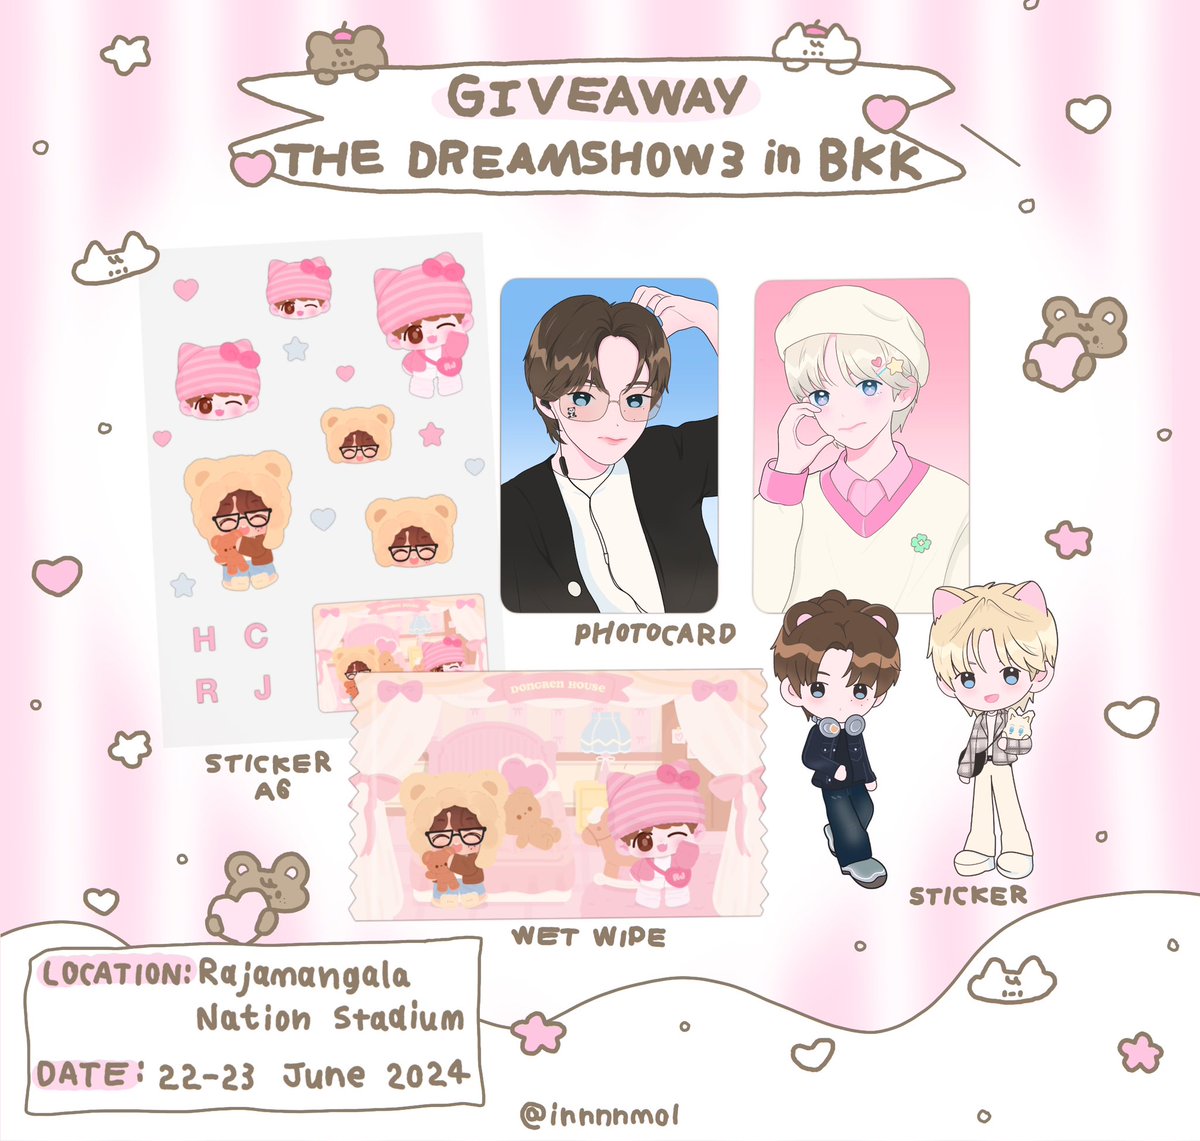 𝗧𝗛𝗘𝗗𝗥𝗘𝗔𝗠𝗦𝗛♡𝗪𝟯 𝗶𝗻 𝗕𝗞𝗞

H🐻echan set & R🦊njun set
(choose one set)

date : 22-23 June 2024 
location/time : tba 

♡ rt & show this tweet ♡

#NCTDREAM_THEDREAMSHOW3_in_BKK